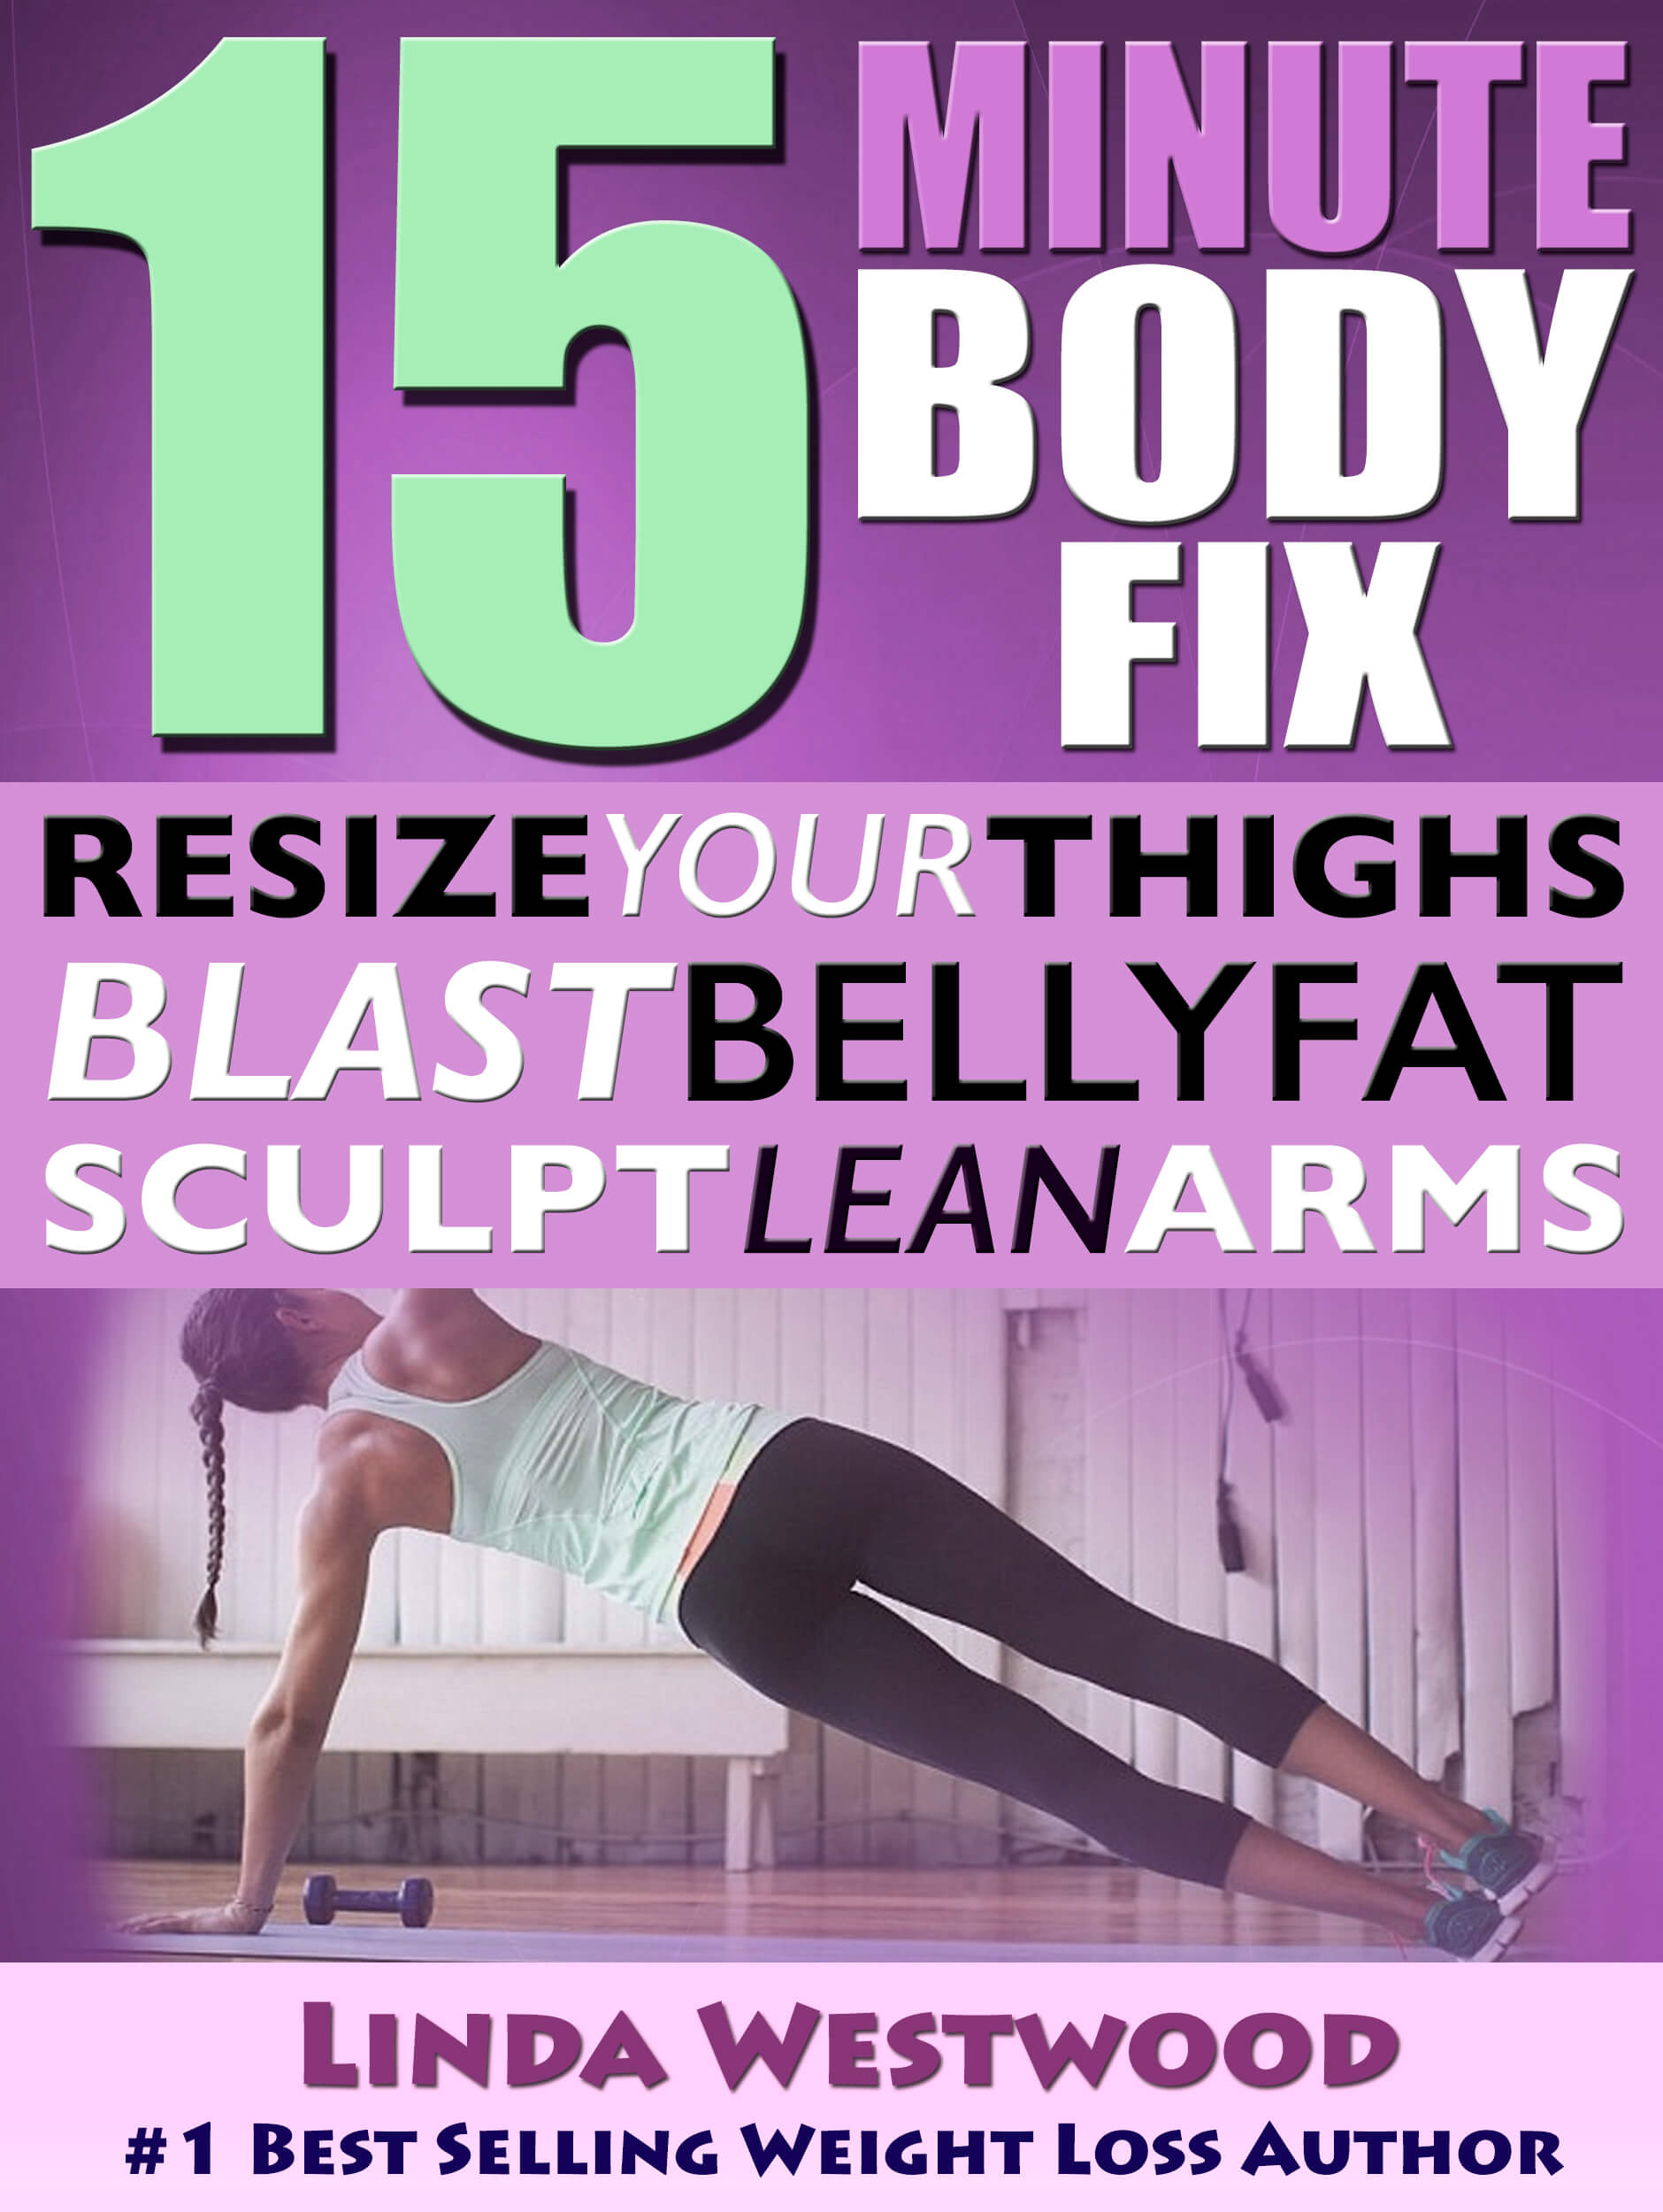 FREE: 15-Minute Body Fix (3rd Edition): Resize Your Thighs, Blast Belly Fat & Sculpt Lean Arms! (Exercise) by Linda Westwood